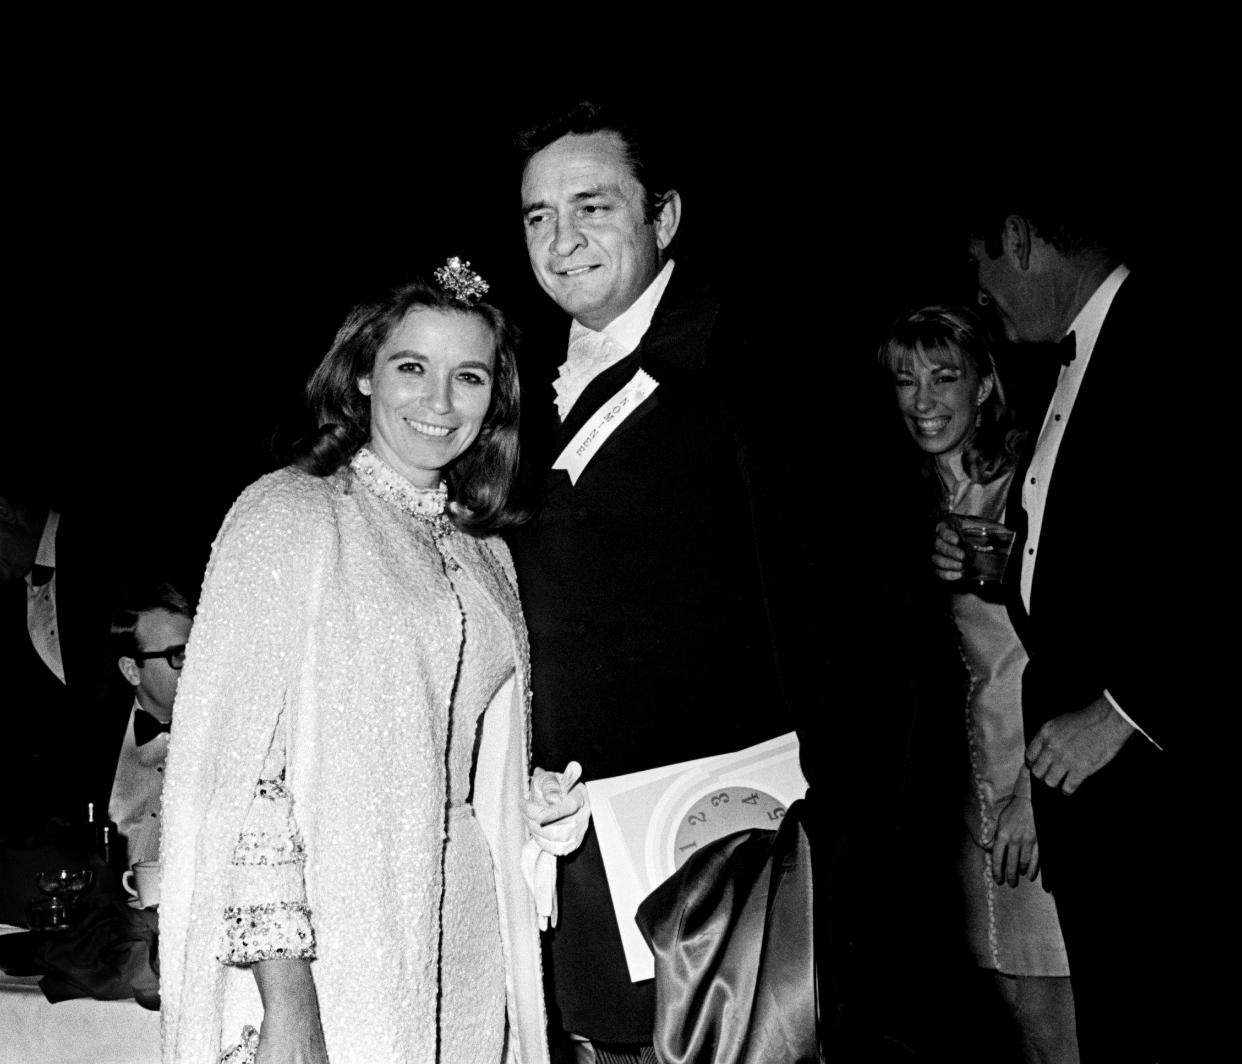 Country music star Johnny Cash and June Carter Cash arrive for the 11th annual Grammy Award show at the National Guard Armory in Nashville March 12, 1969. The awards were presented simultaneously at banquets in New York, Chicago, Los Angeles and Nashville.